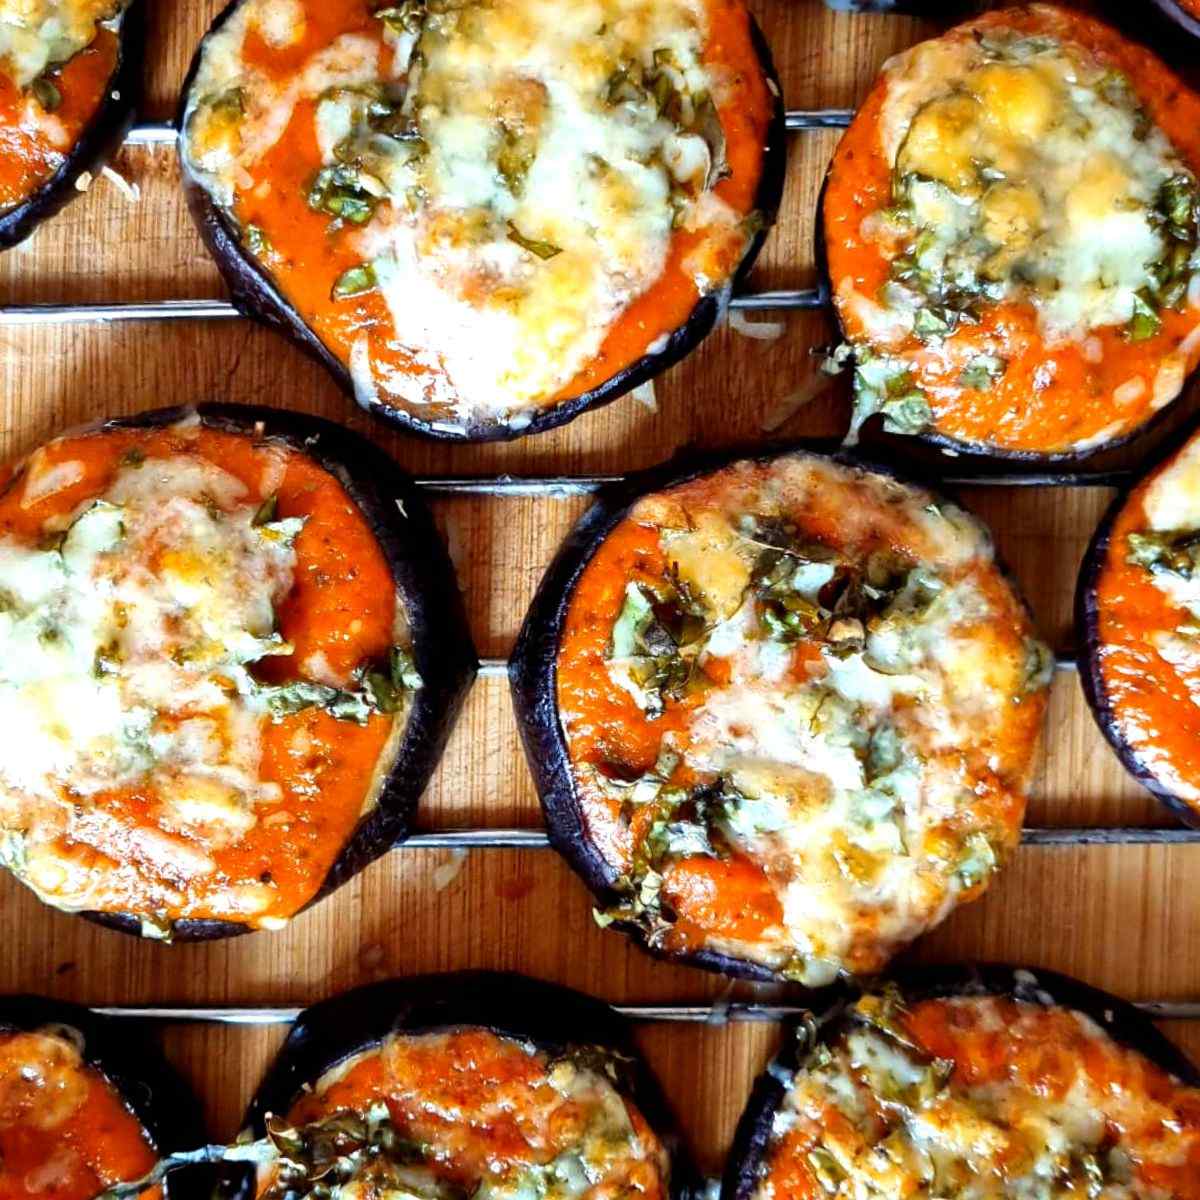 Mini eggplant pizzas made with sliced eggplant as the base and topped with passata sauce and shredded mozzarella cheese.